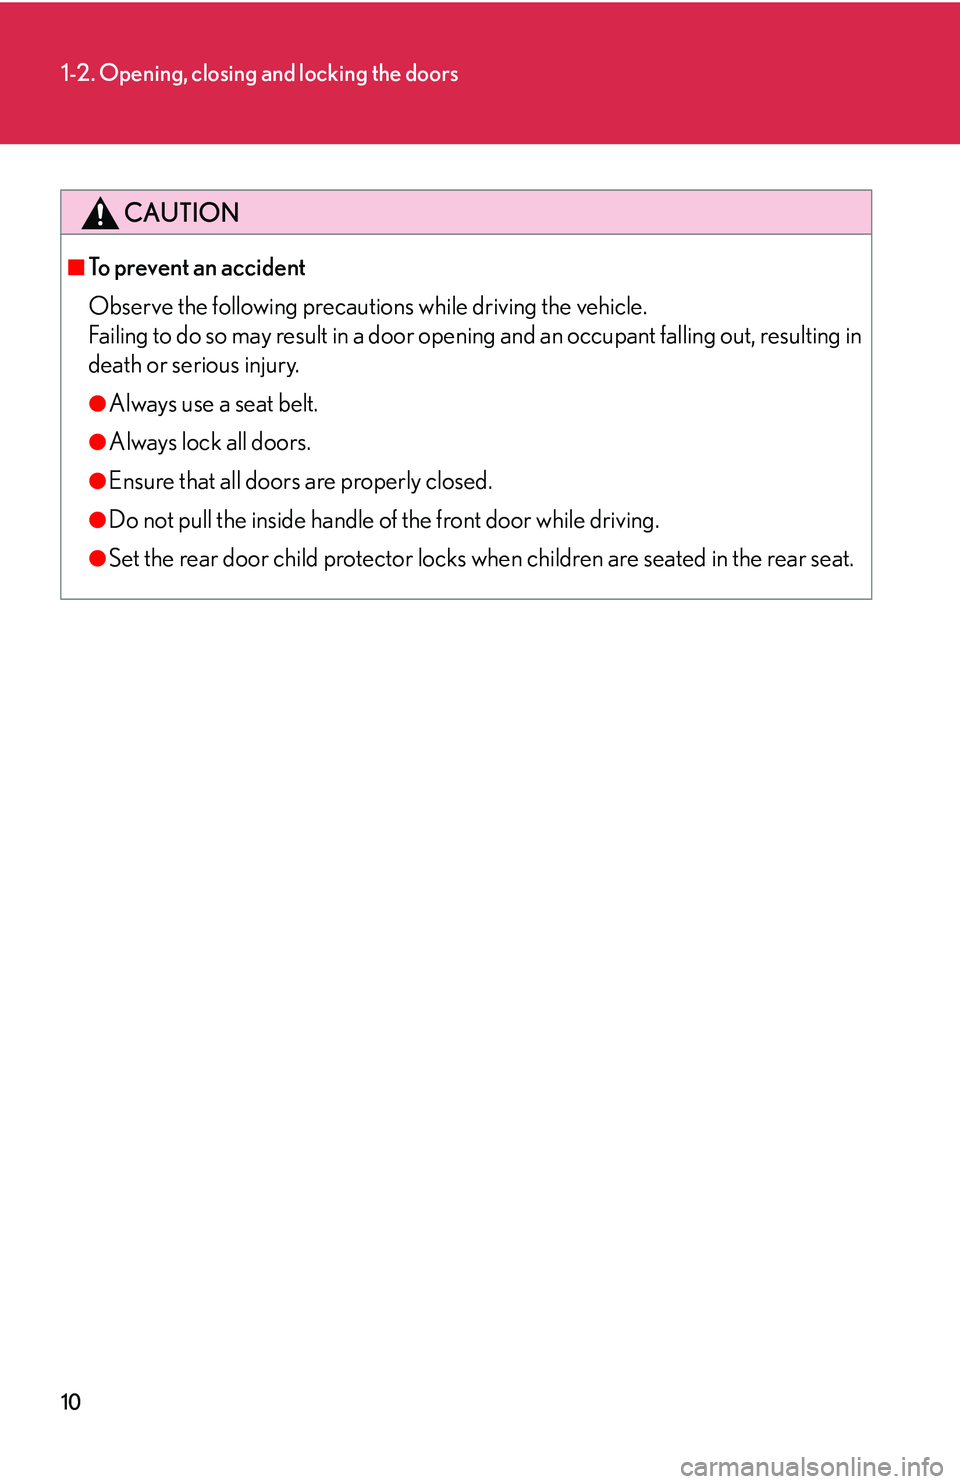 Lexus GX470 2007  Air Conditioning / LEXUS 2007 GX470 OWNERS MANUAL (OM60C64U) 10
1-2. Opening, closing and locking the doors
CAUTION
■To prevent an accident
Observe the following precautions while driving the vehicle.
Failing to do so may result in a door opening and an occup